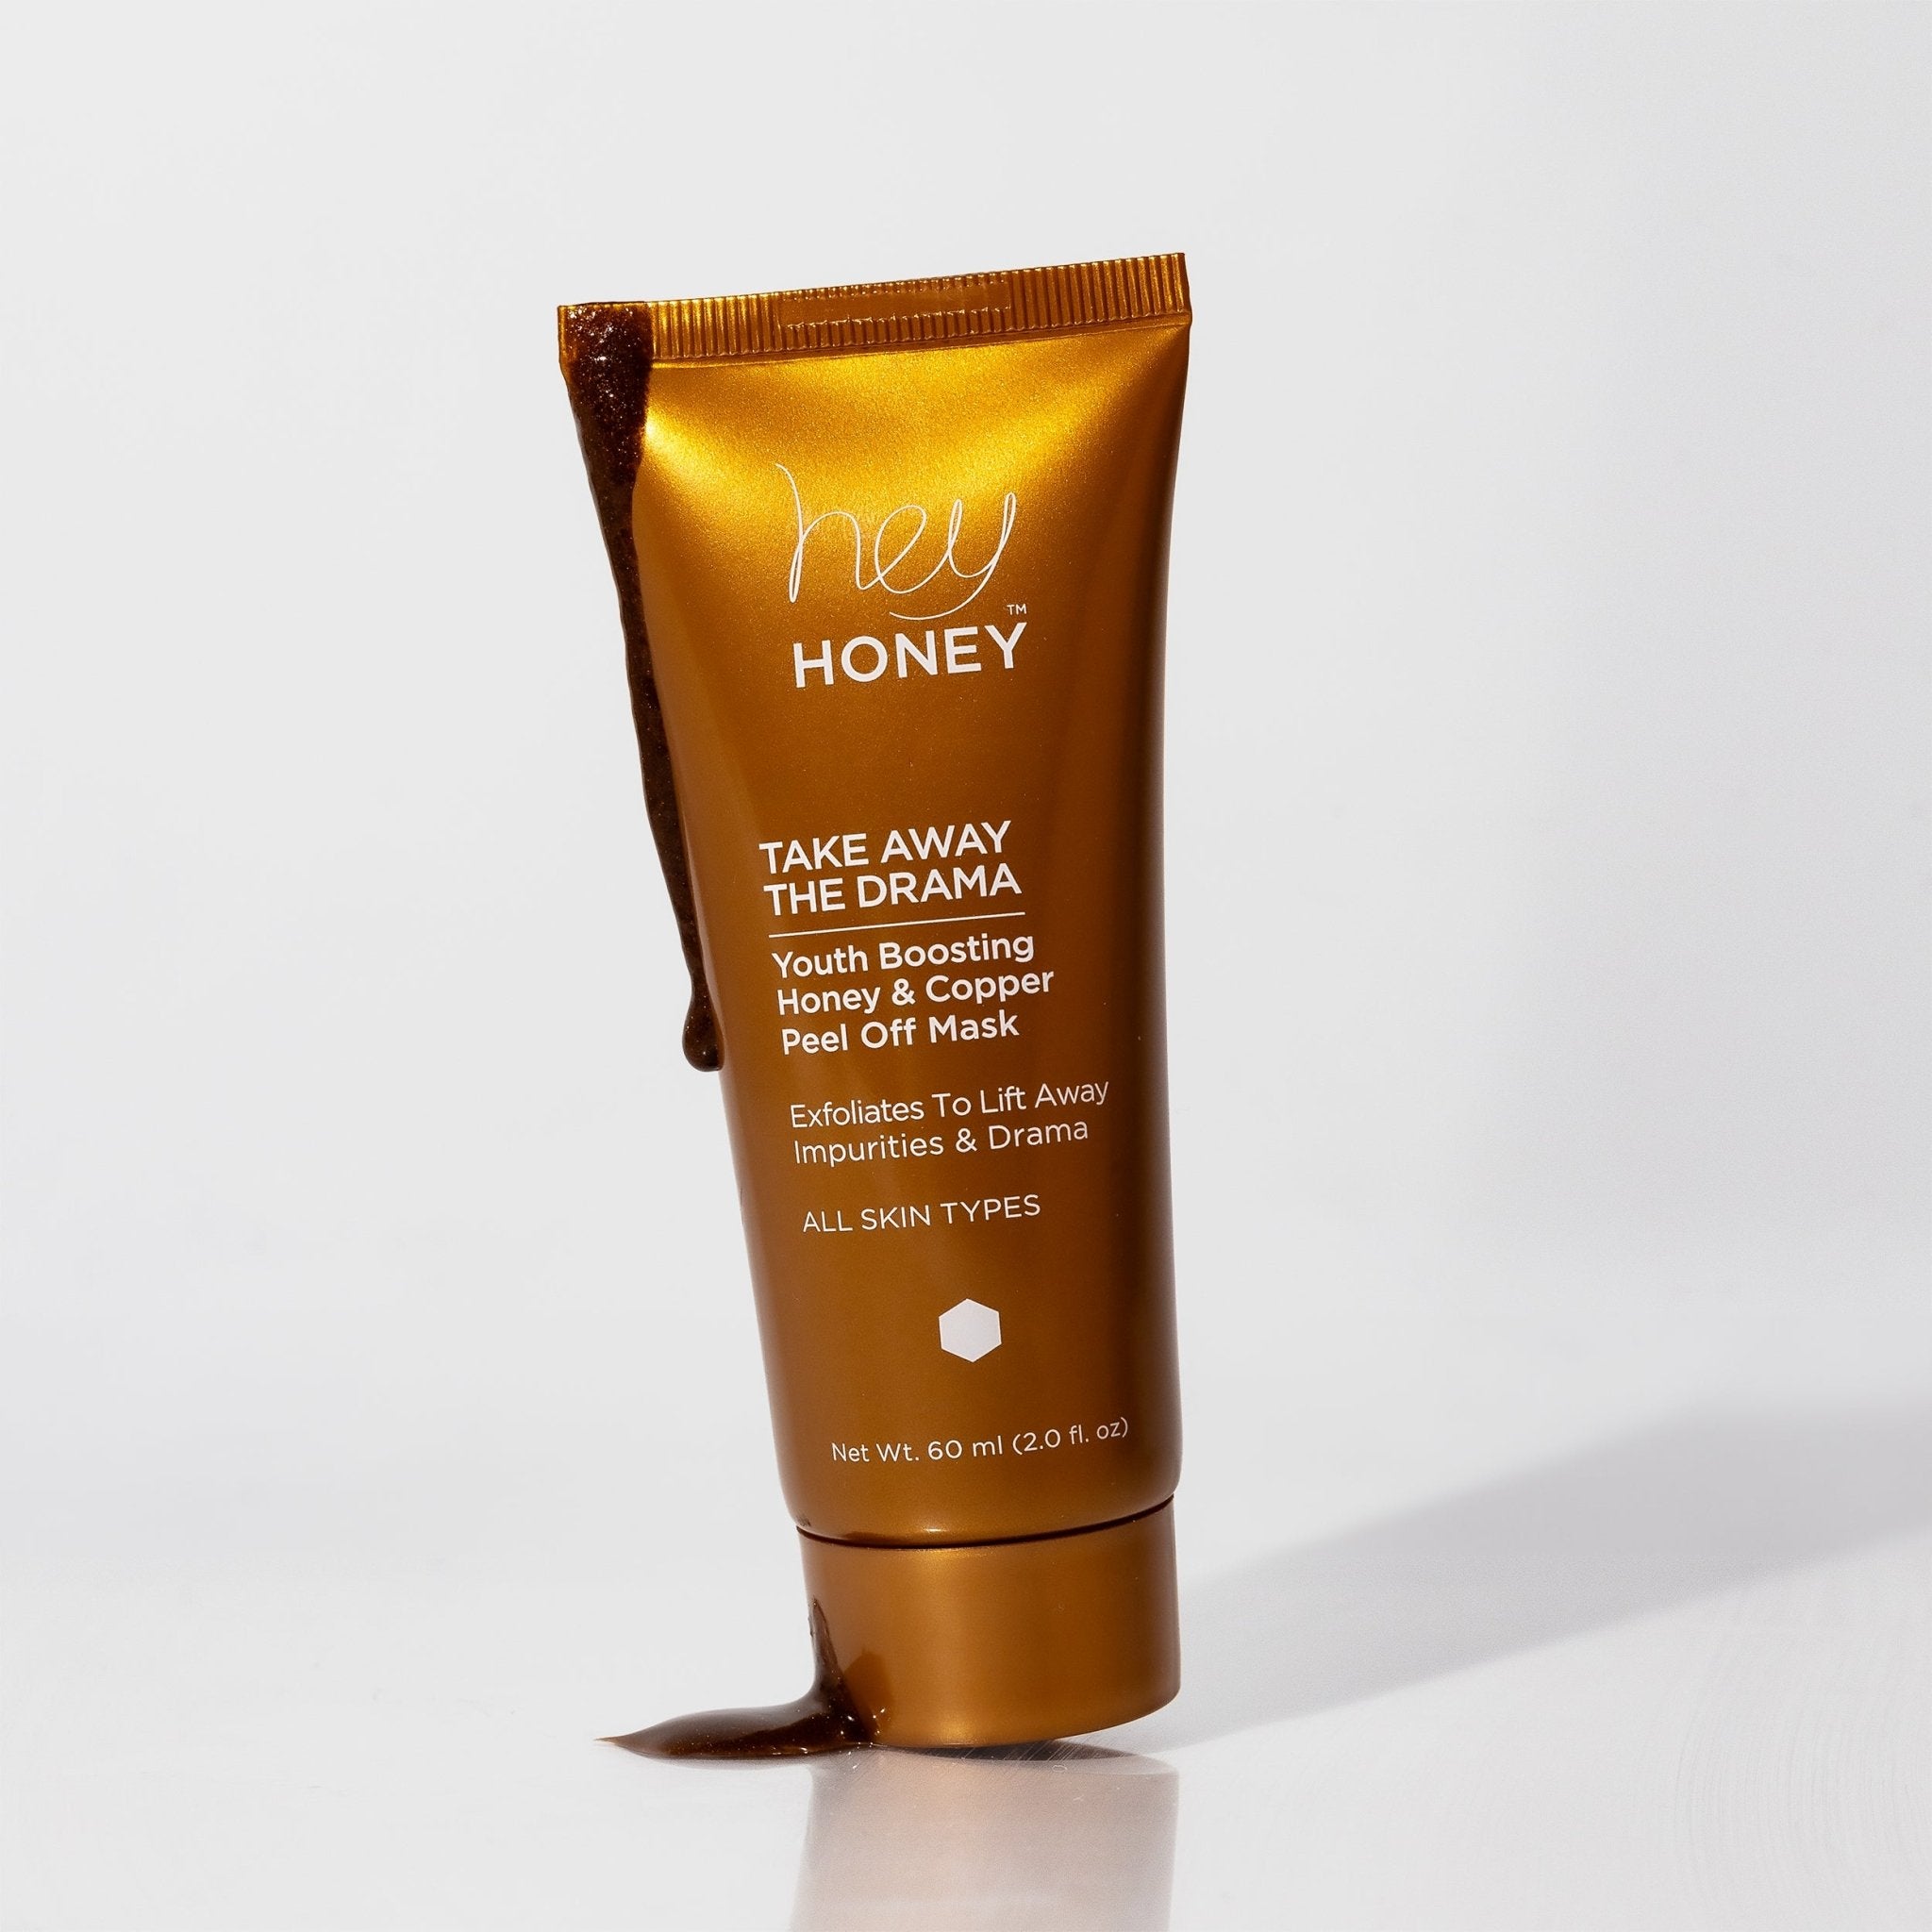 TAKE AWAY THE DRAMA - Youth Boosting Honey and Copper Peel Off Mask